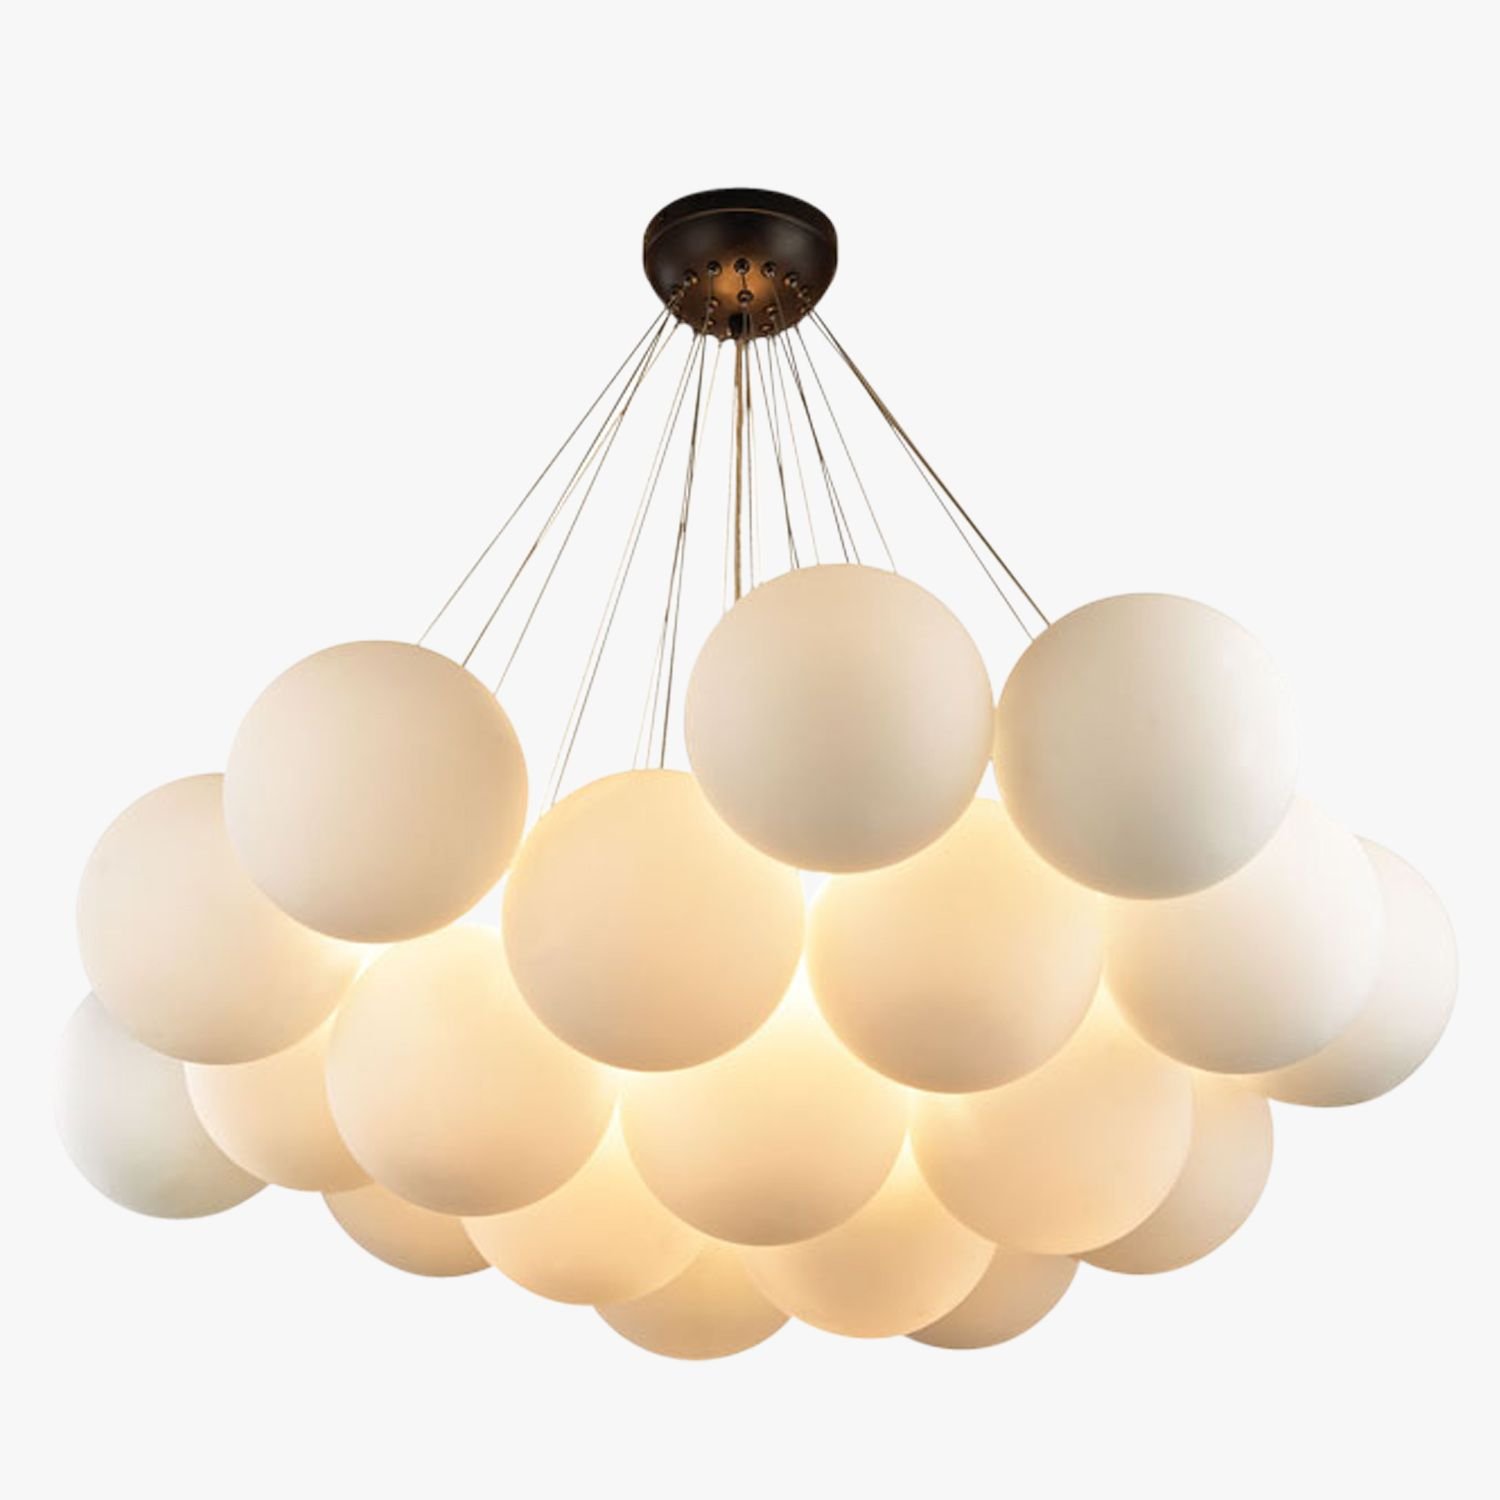 Люстра из шаров. Люстра large Frosted Bubble Chandelier. Люстра Bubble Amber. Люстра Bubble Round 32. Люстра balls White & Brass 9.